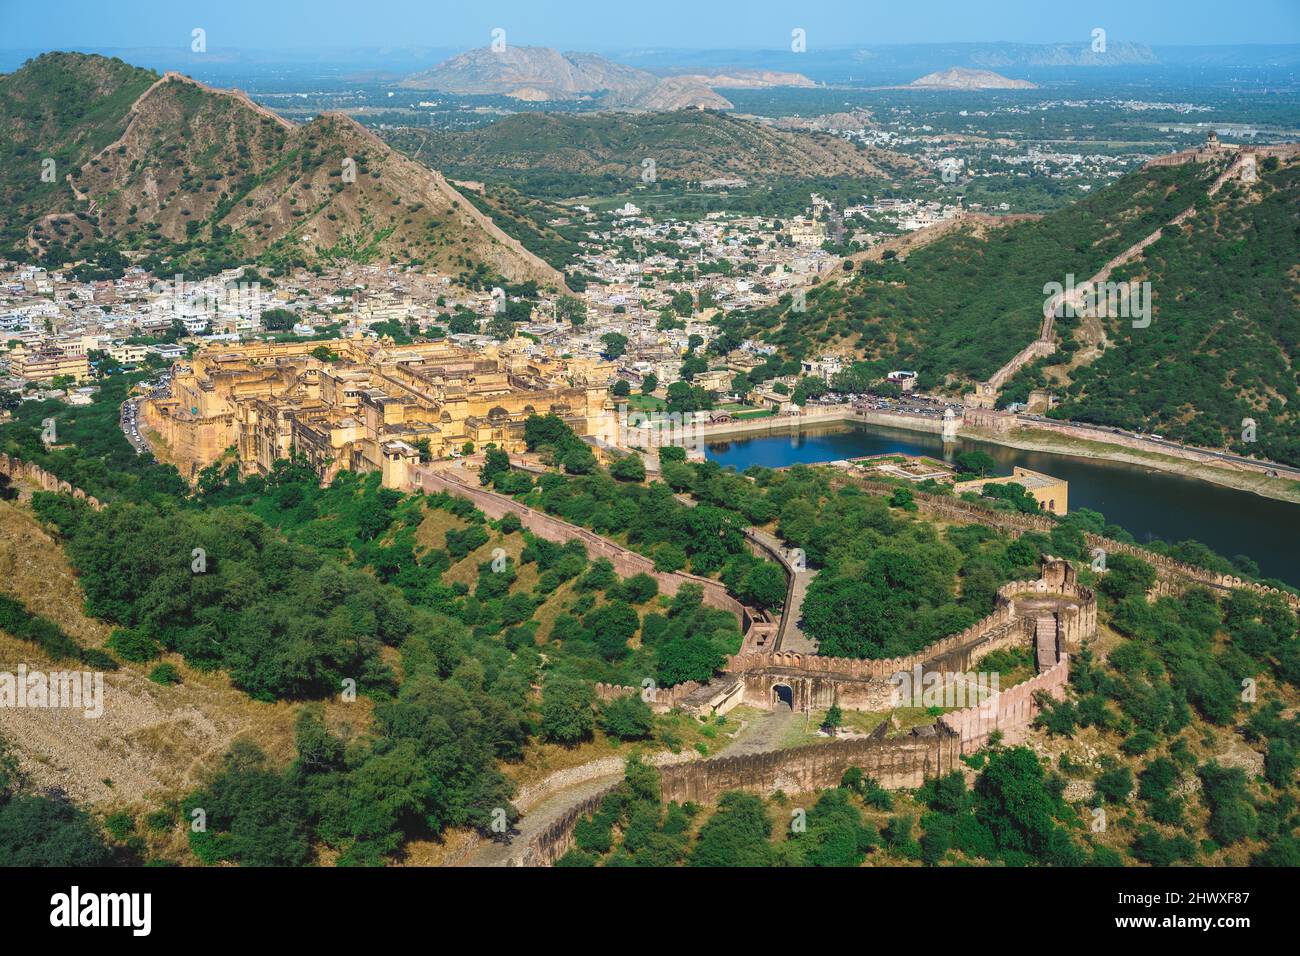 view over Amer fort from Jaigarh Fort in Jaipur, Rajasthan, India Stock Photo